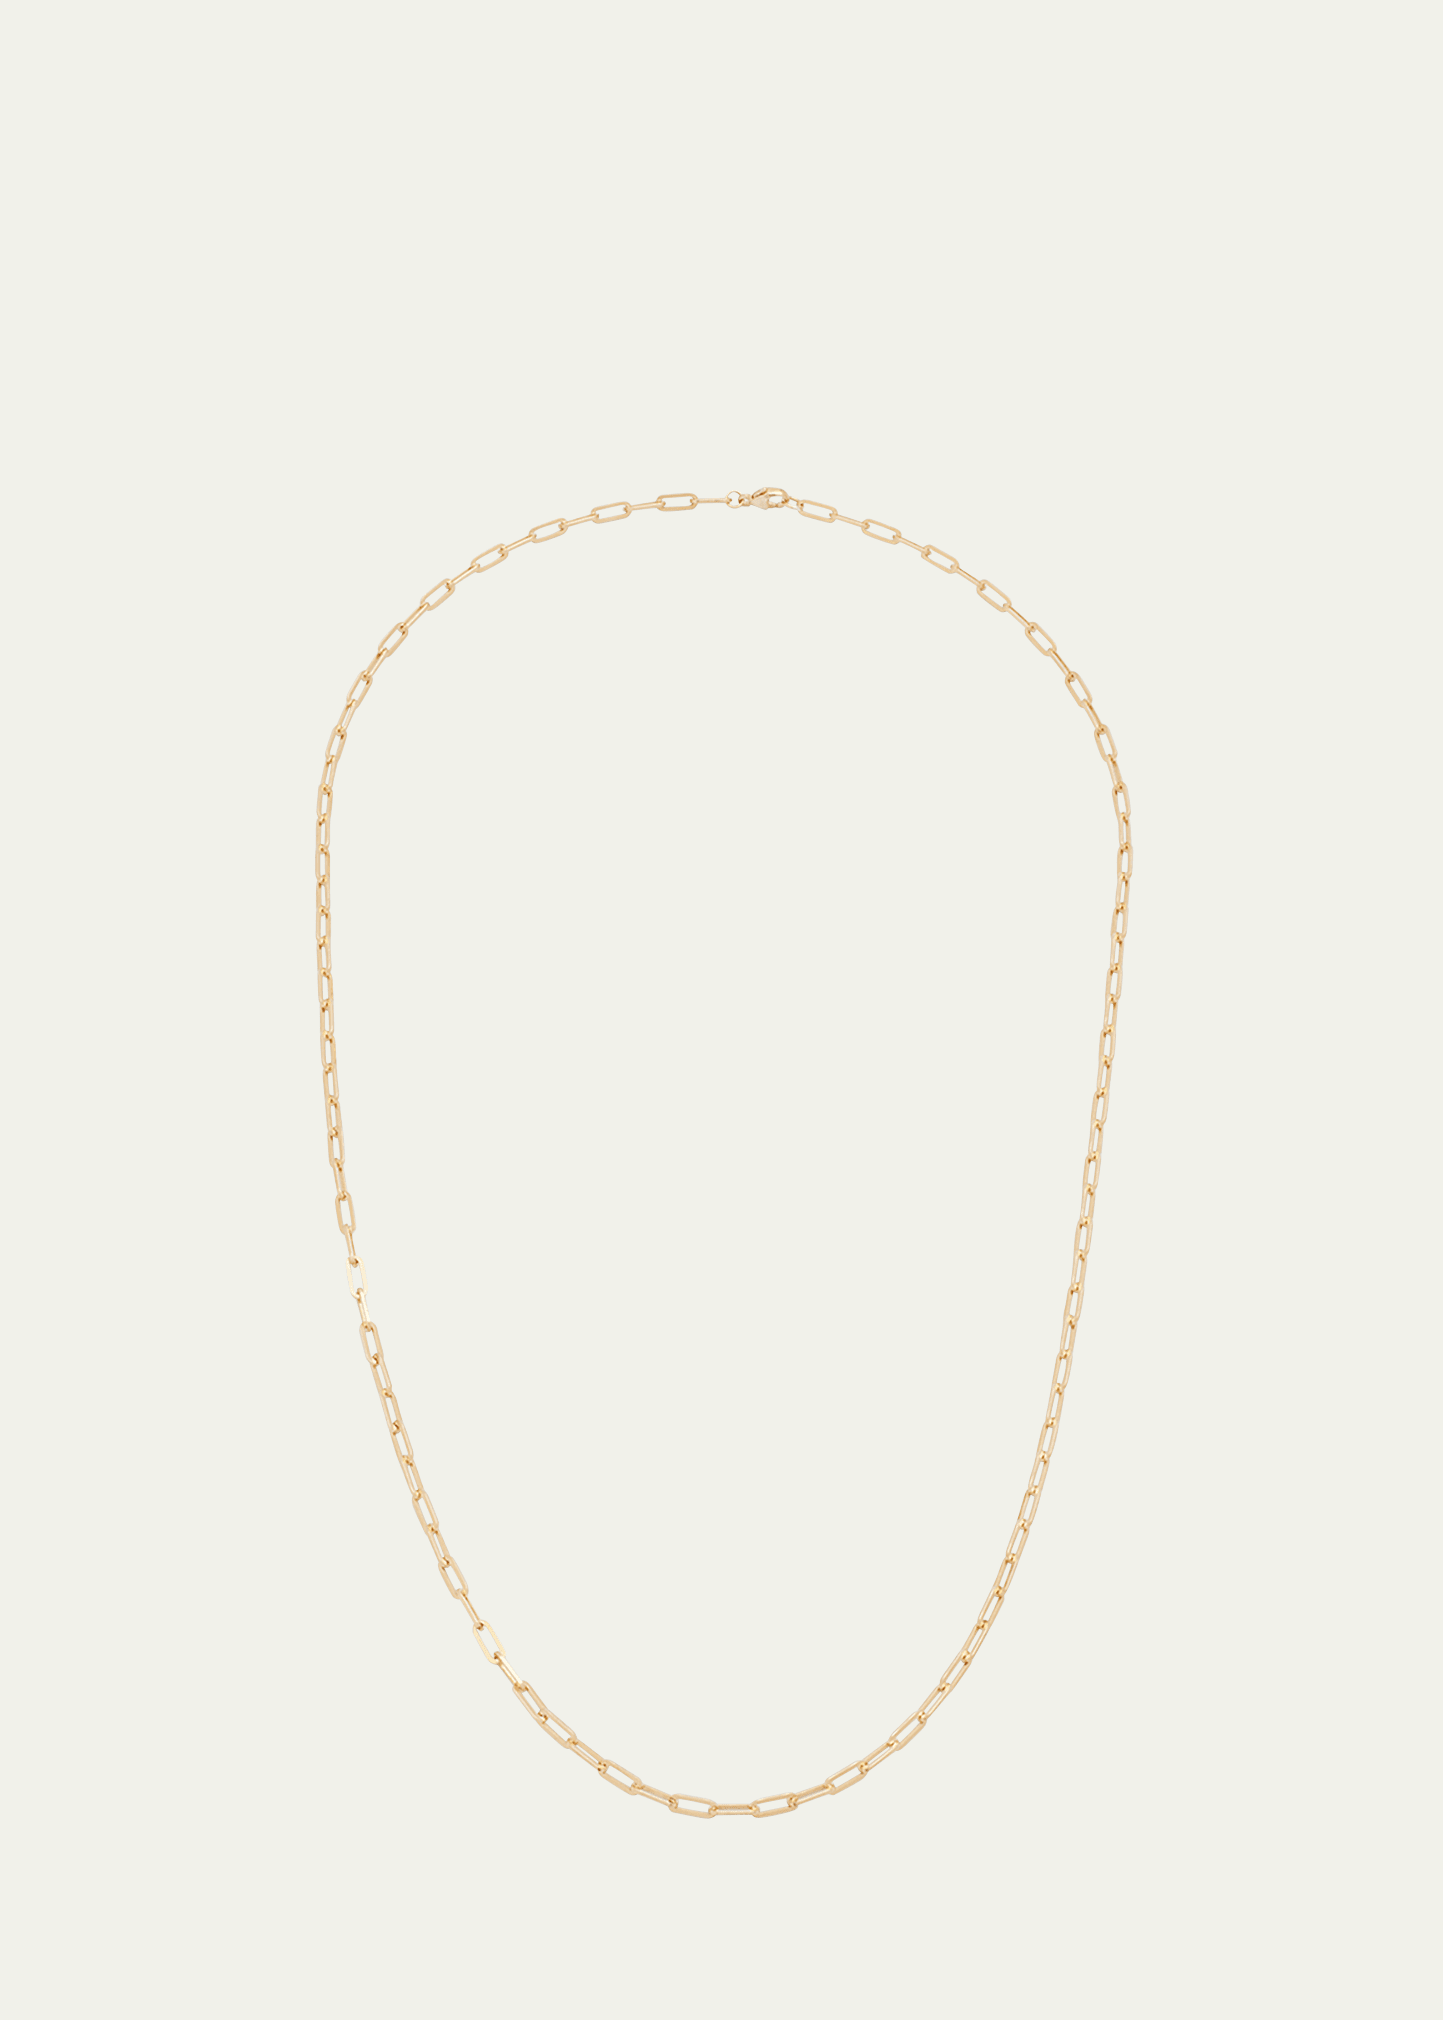 Men's 18K Yellow Gold Paperclip Chain Necklace, 22"L